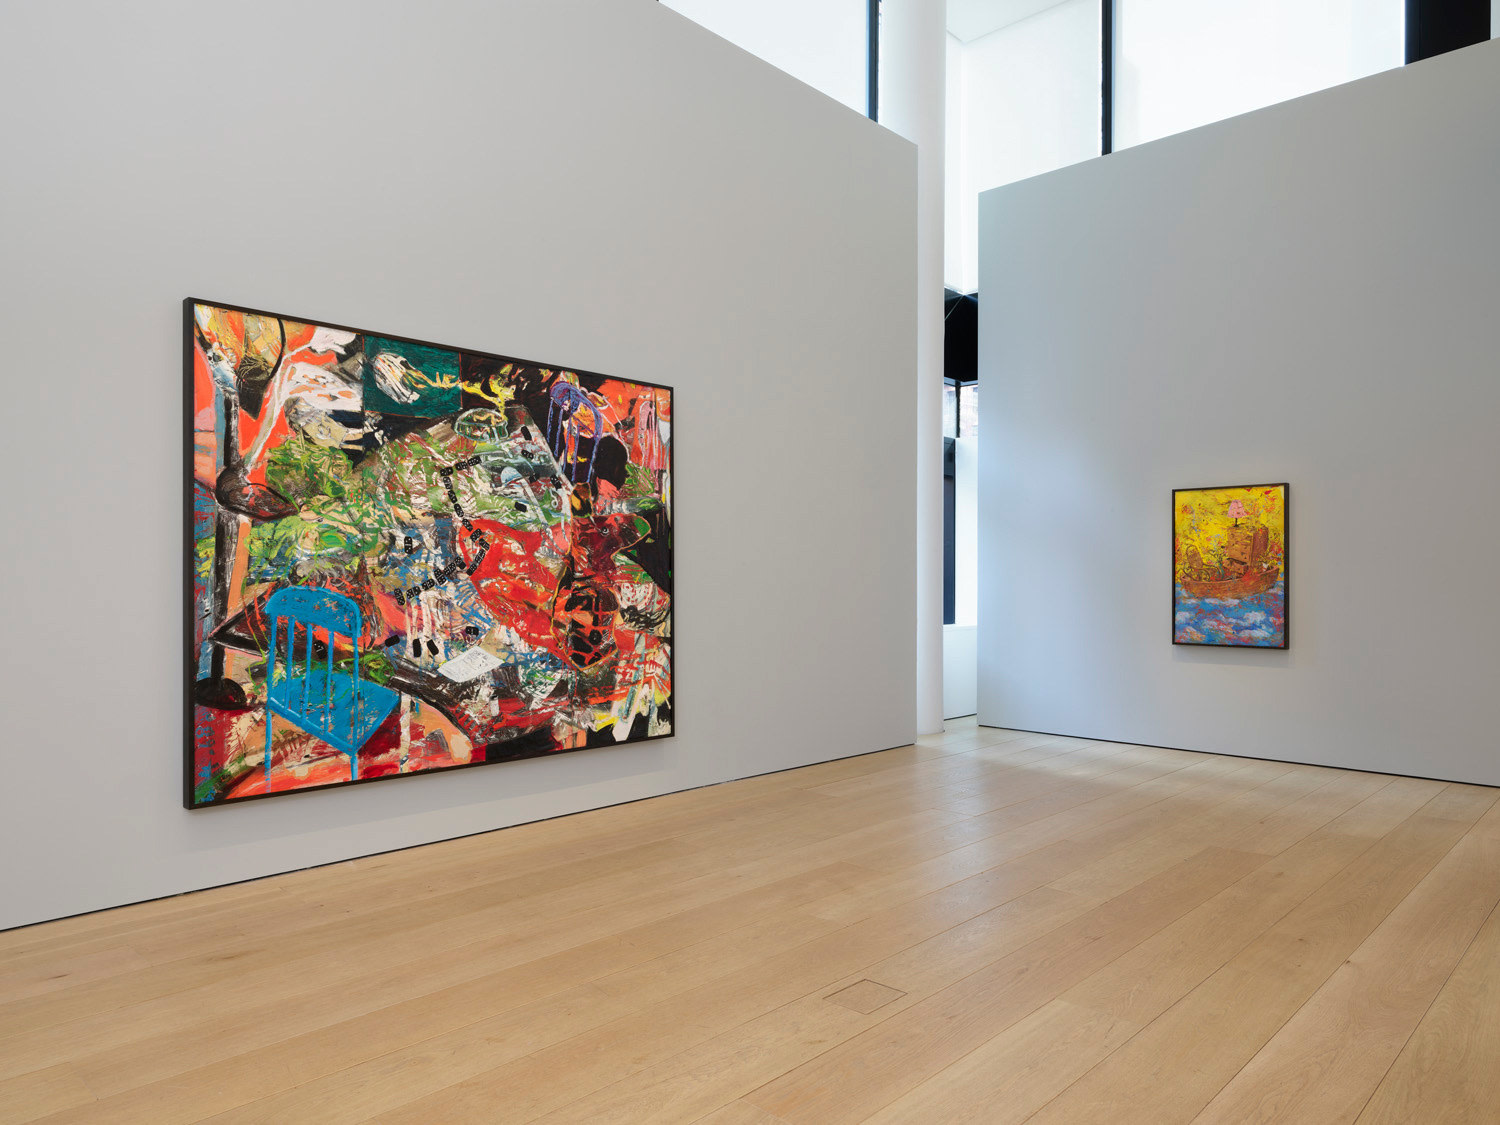 First installation view of the exhibition Angel Otero: The Fortune of Having Been There at Lehmann Maupin in New York